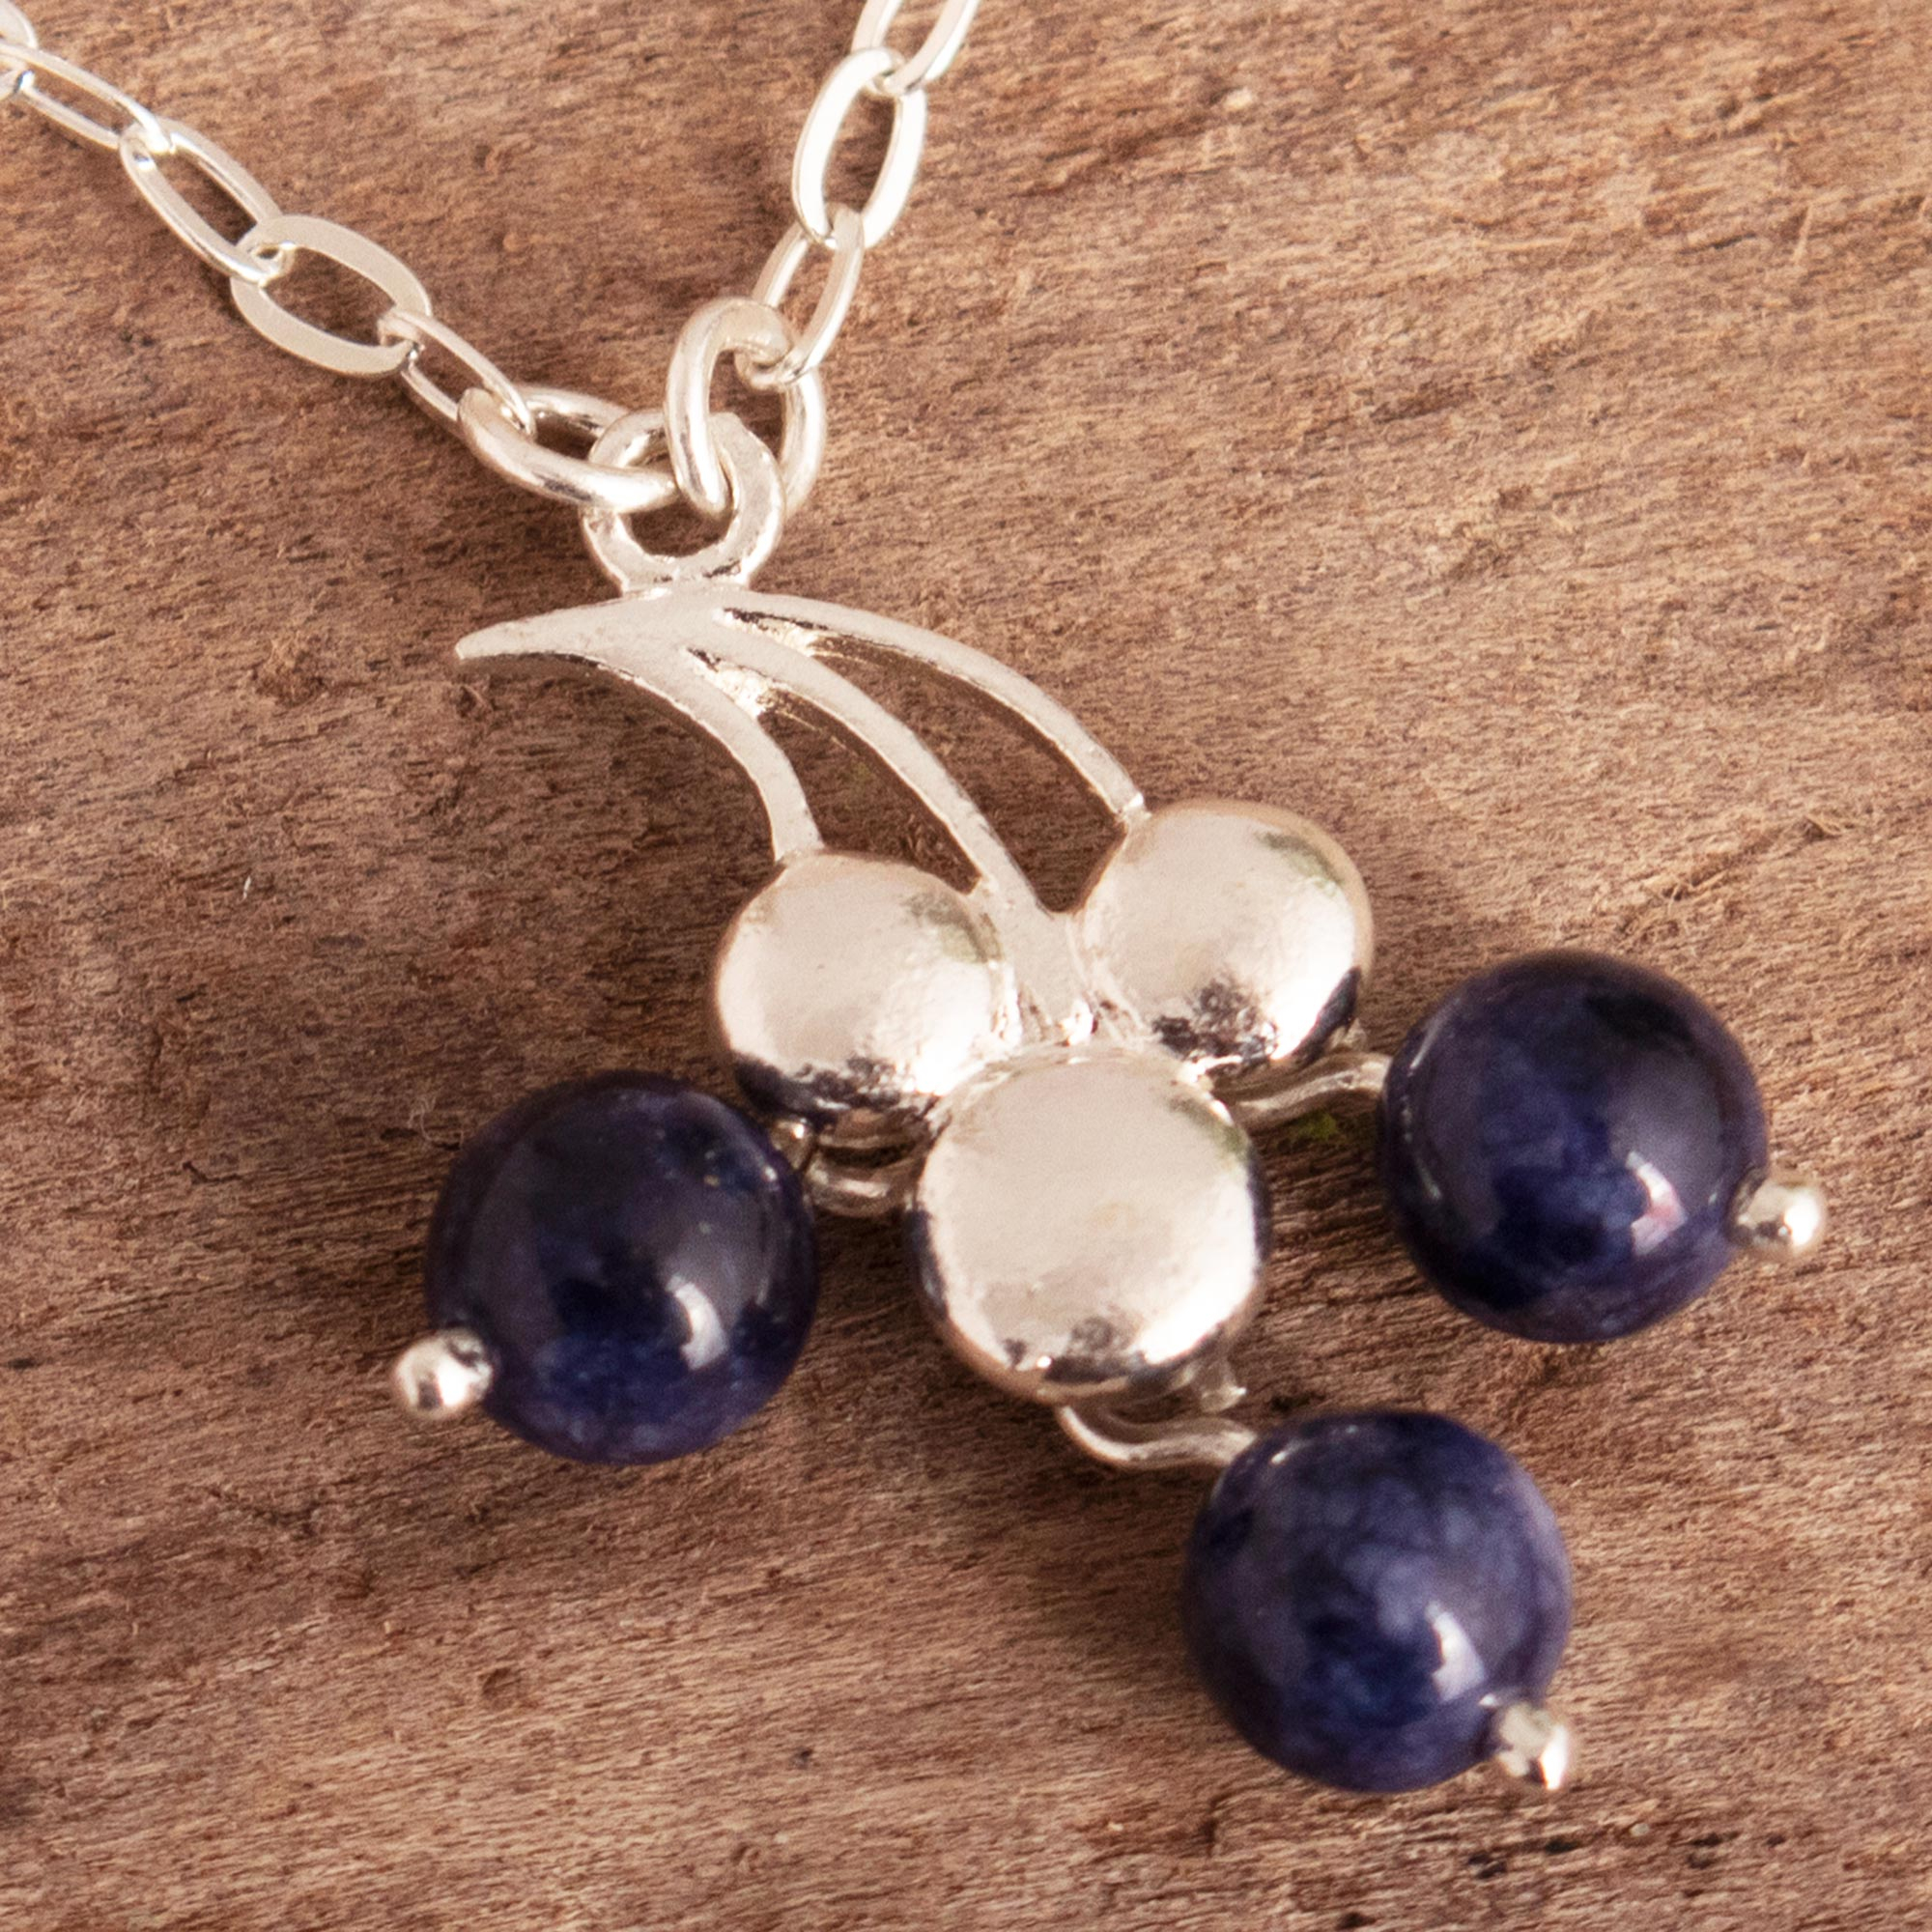 Gemstone Flower Mothers Day Floral Jewellery Floral Necklace Flower Necklace Gemstone Jewellery Sodalite Necklace Flower Jewellery,